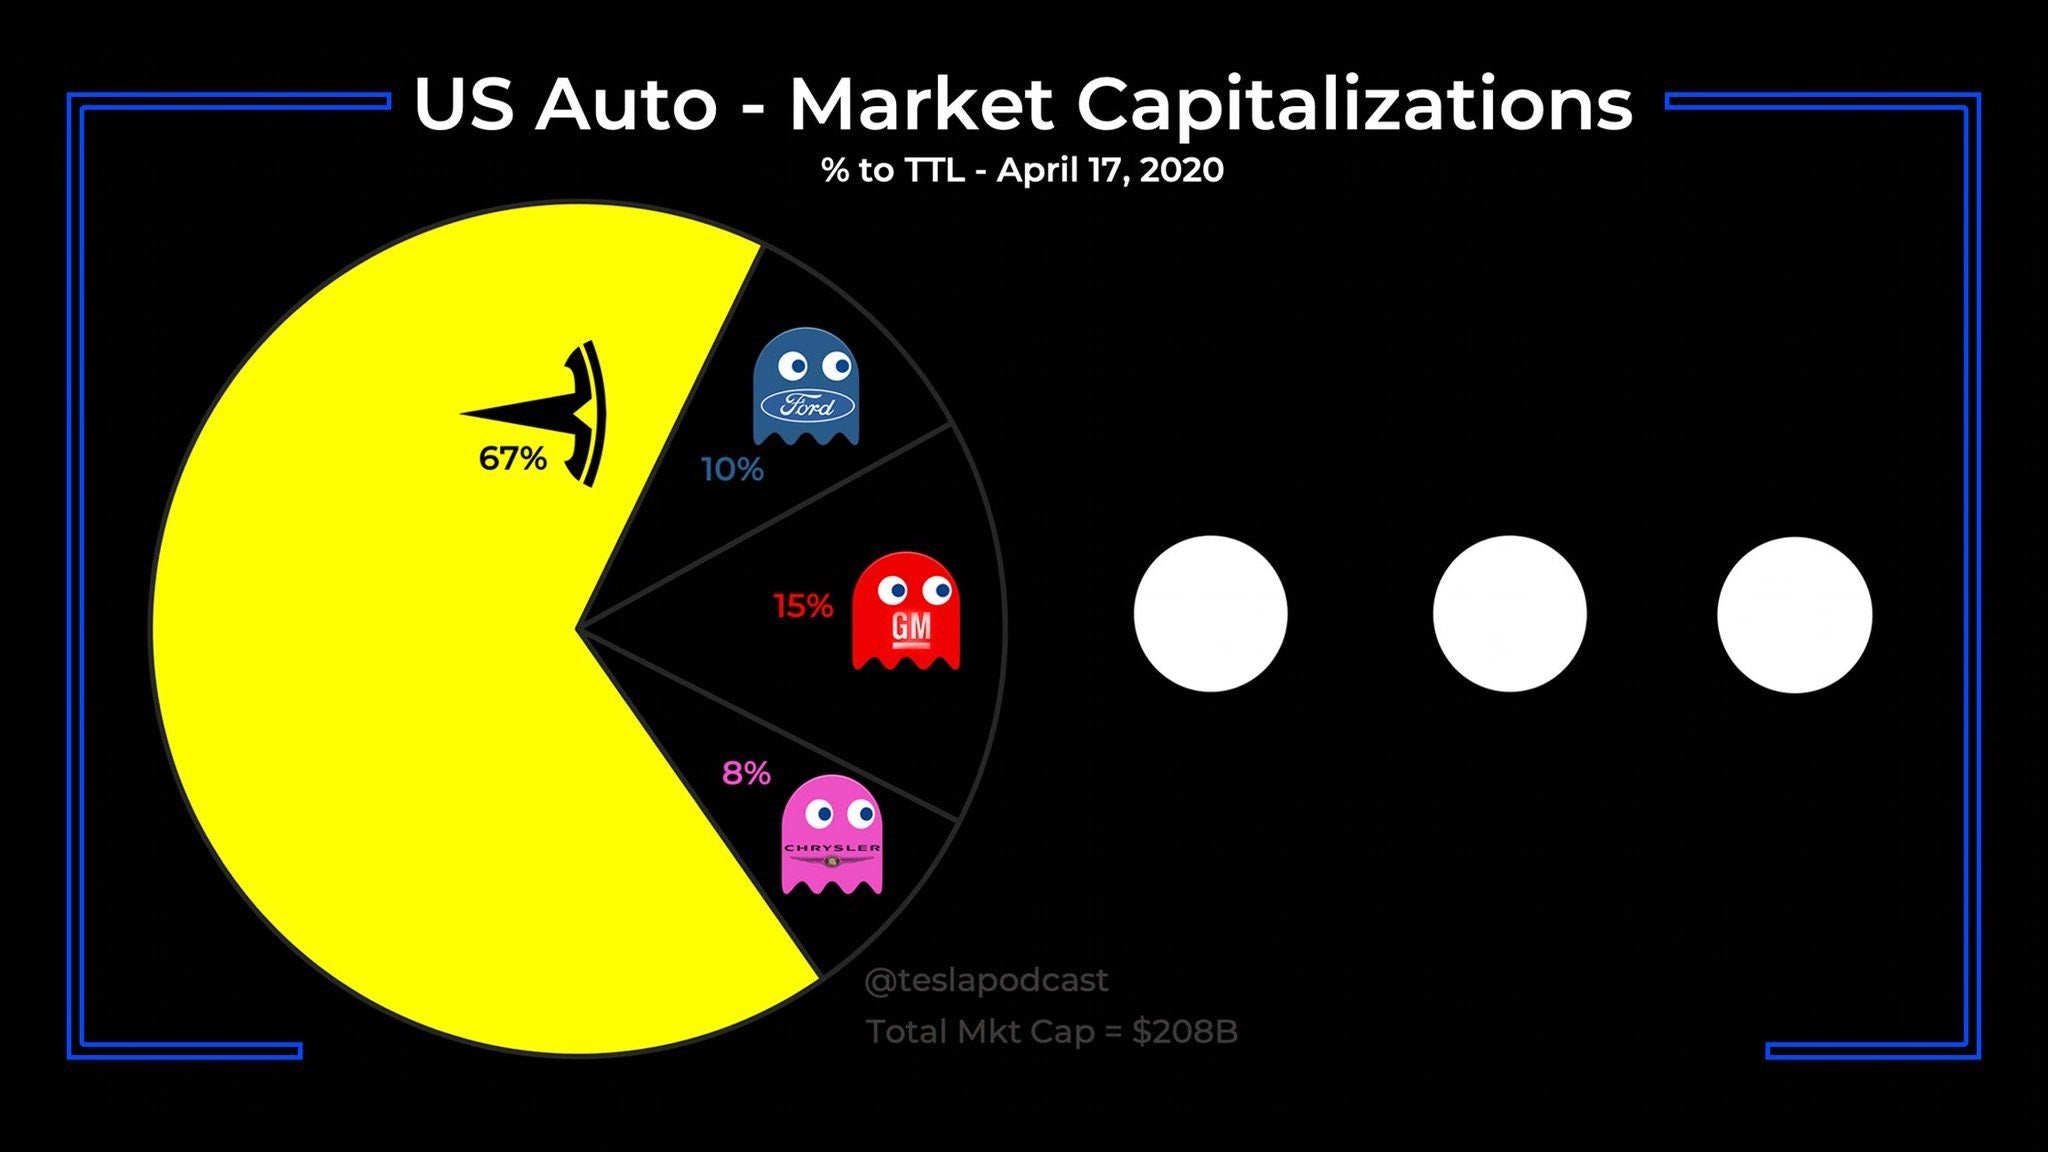 Tesla Became New Iconic Symbol Of US Auto Industry Representing 65%+ of US Automakers’ Market Cap